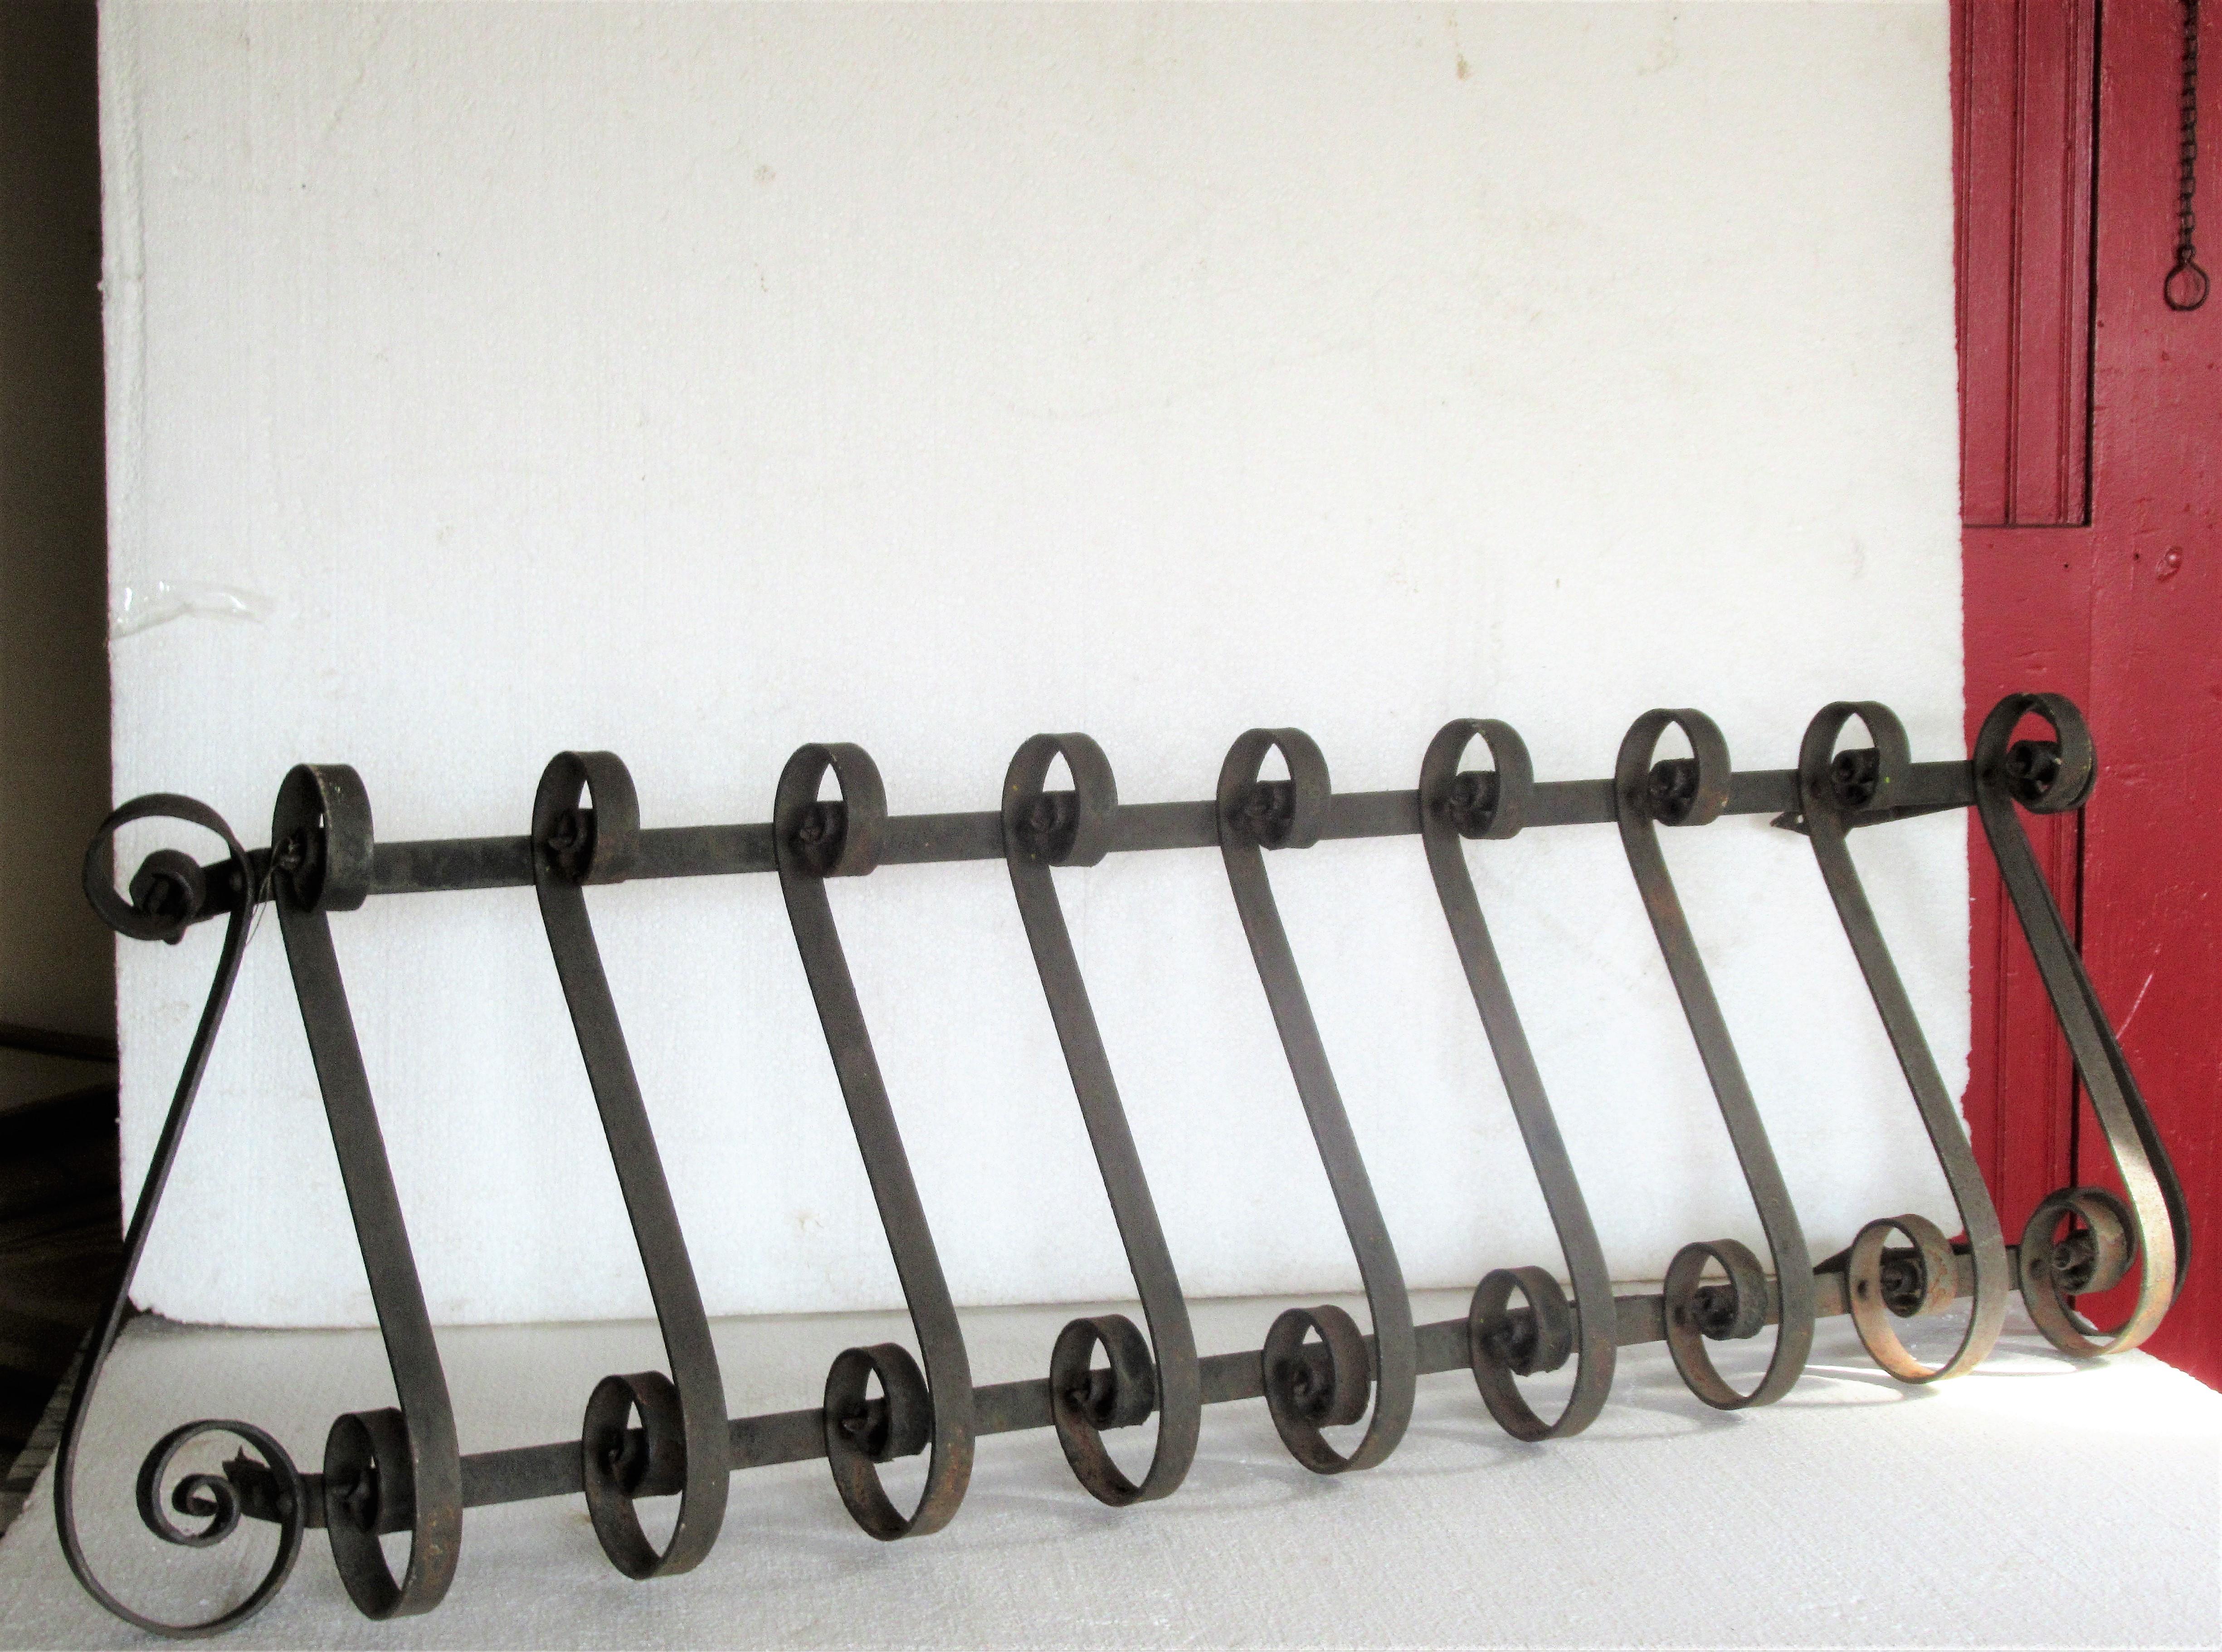 Antique Architectural Hand Wrought Iron Window Box Railing 4